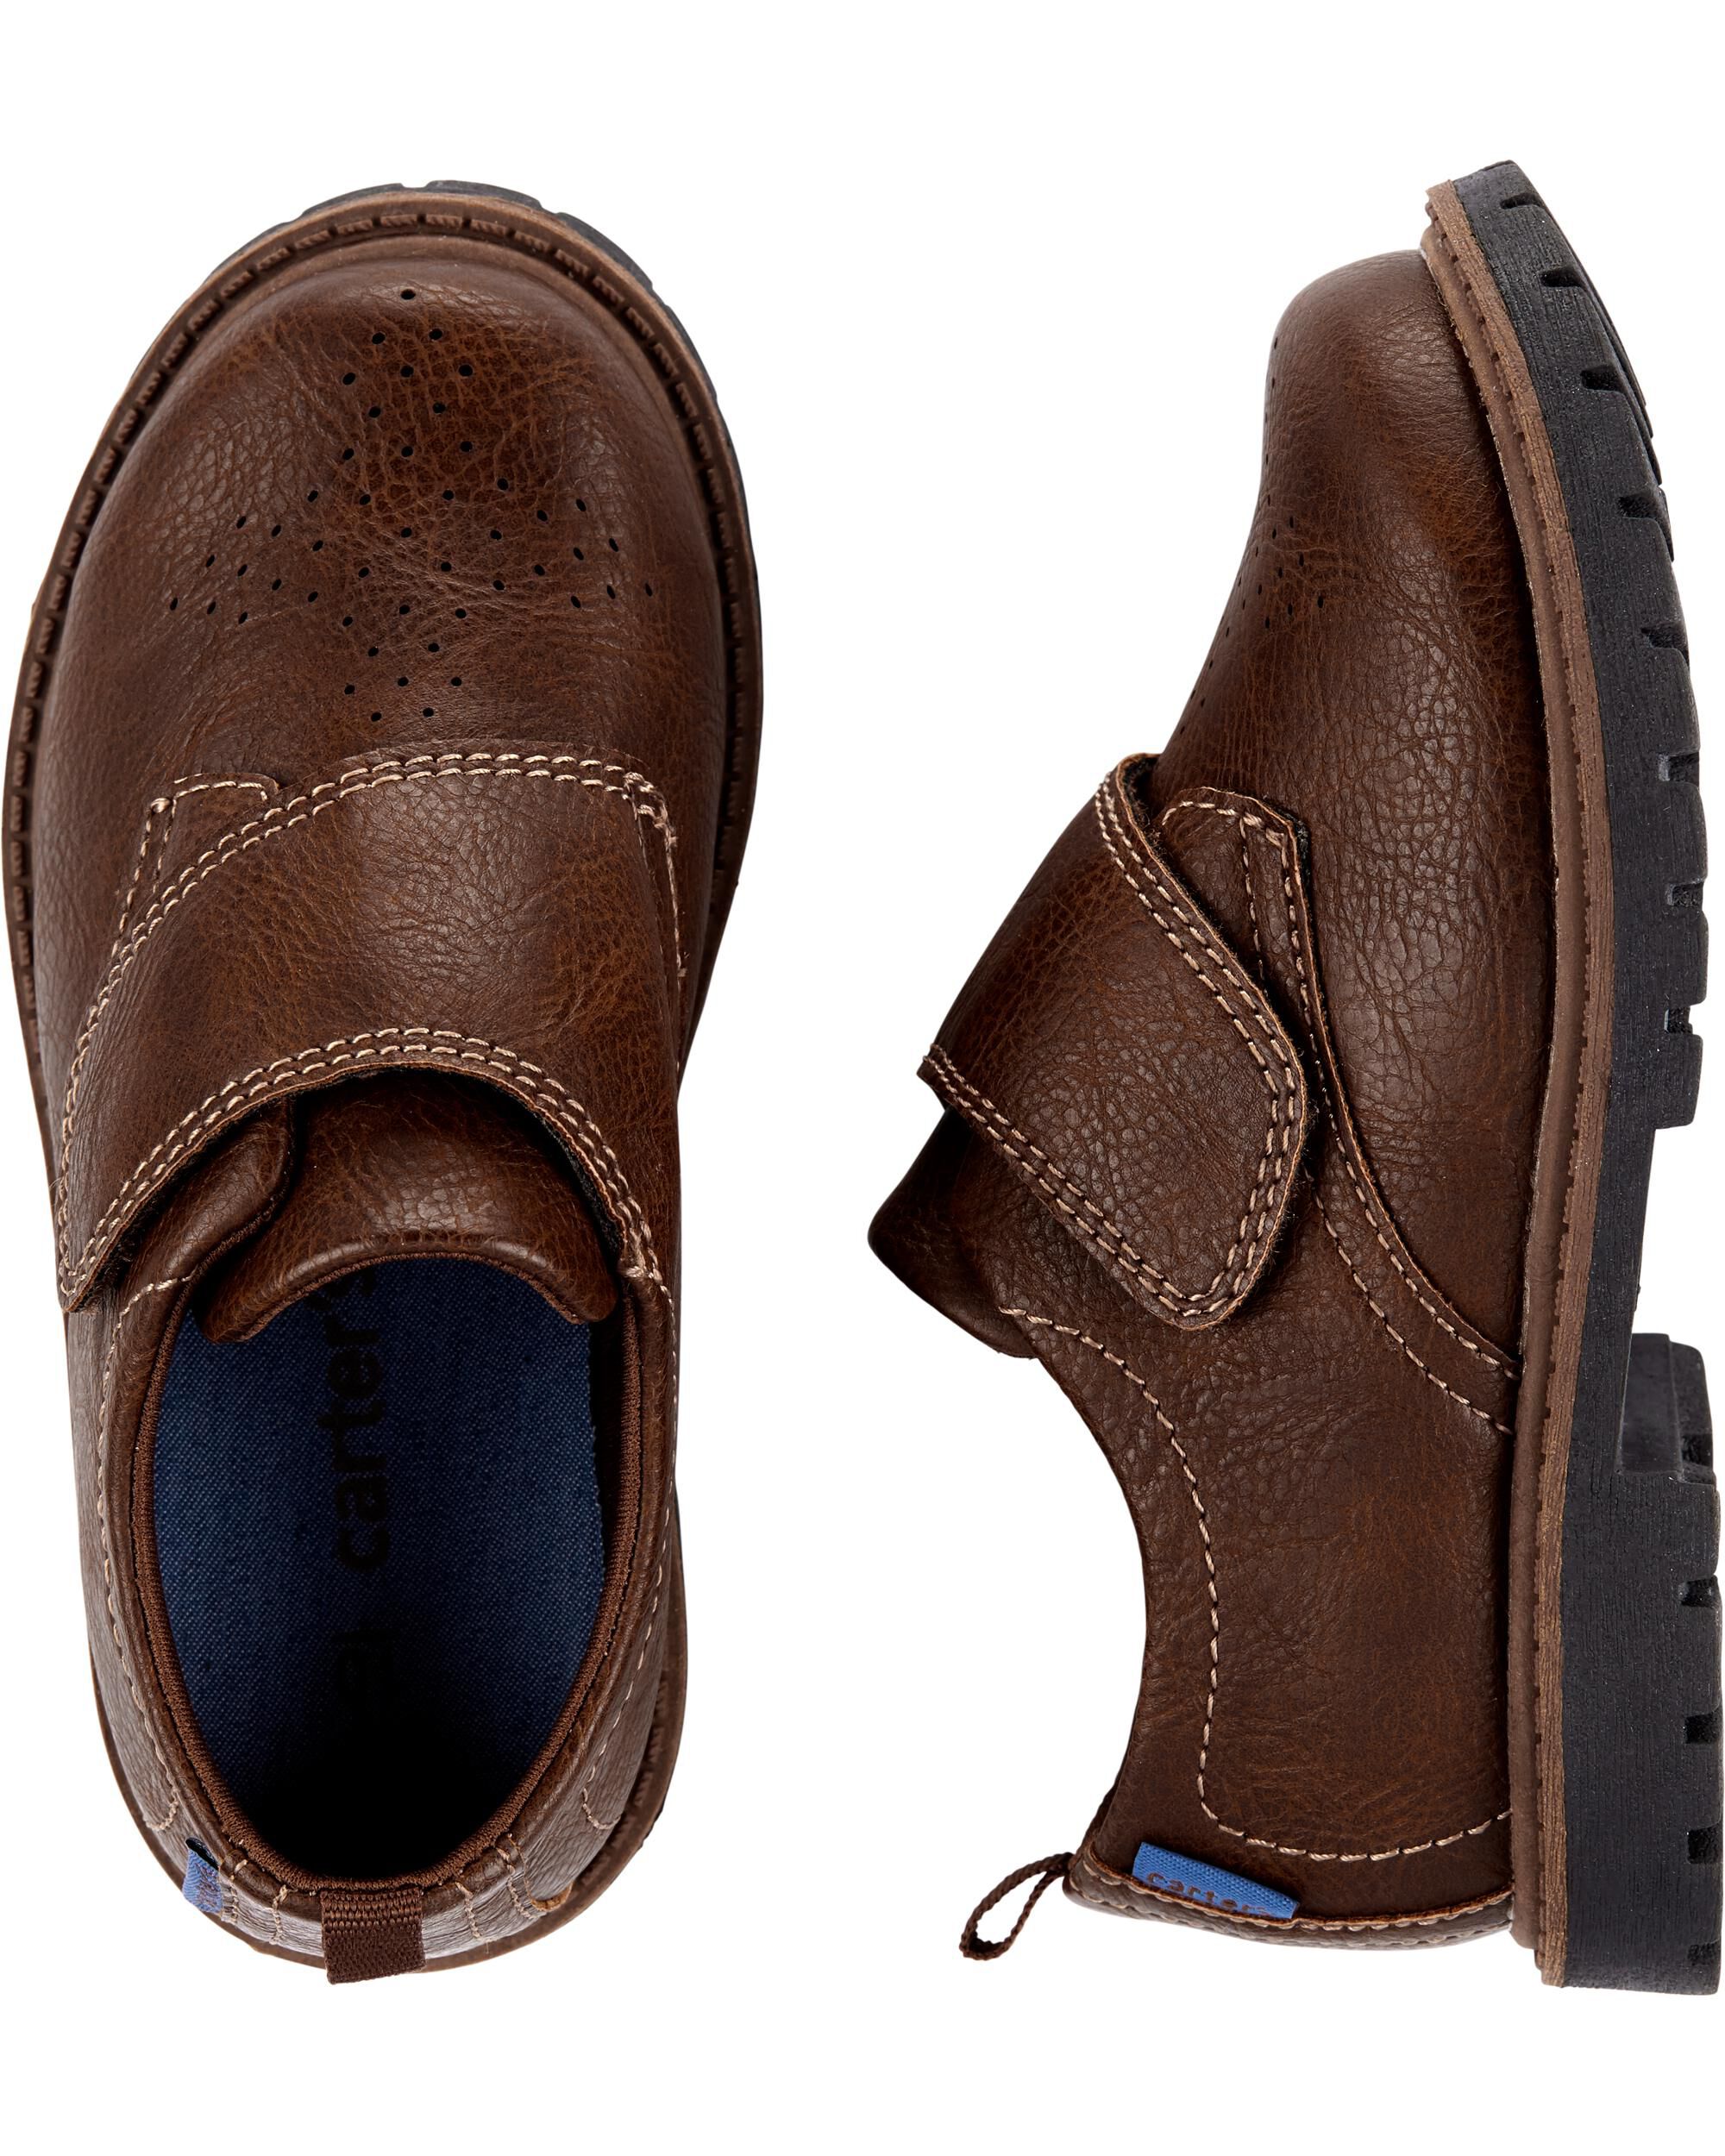 Clearance: Shoes | Carter's | Free Shipping